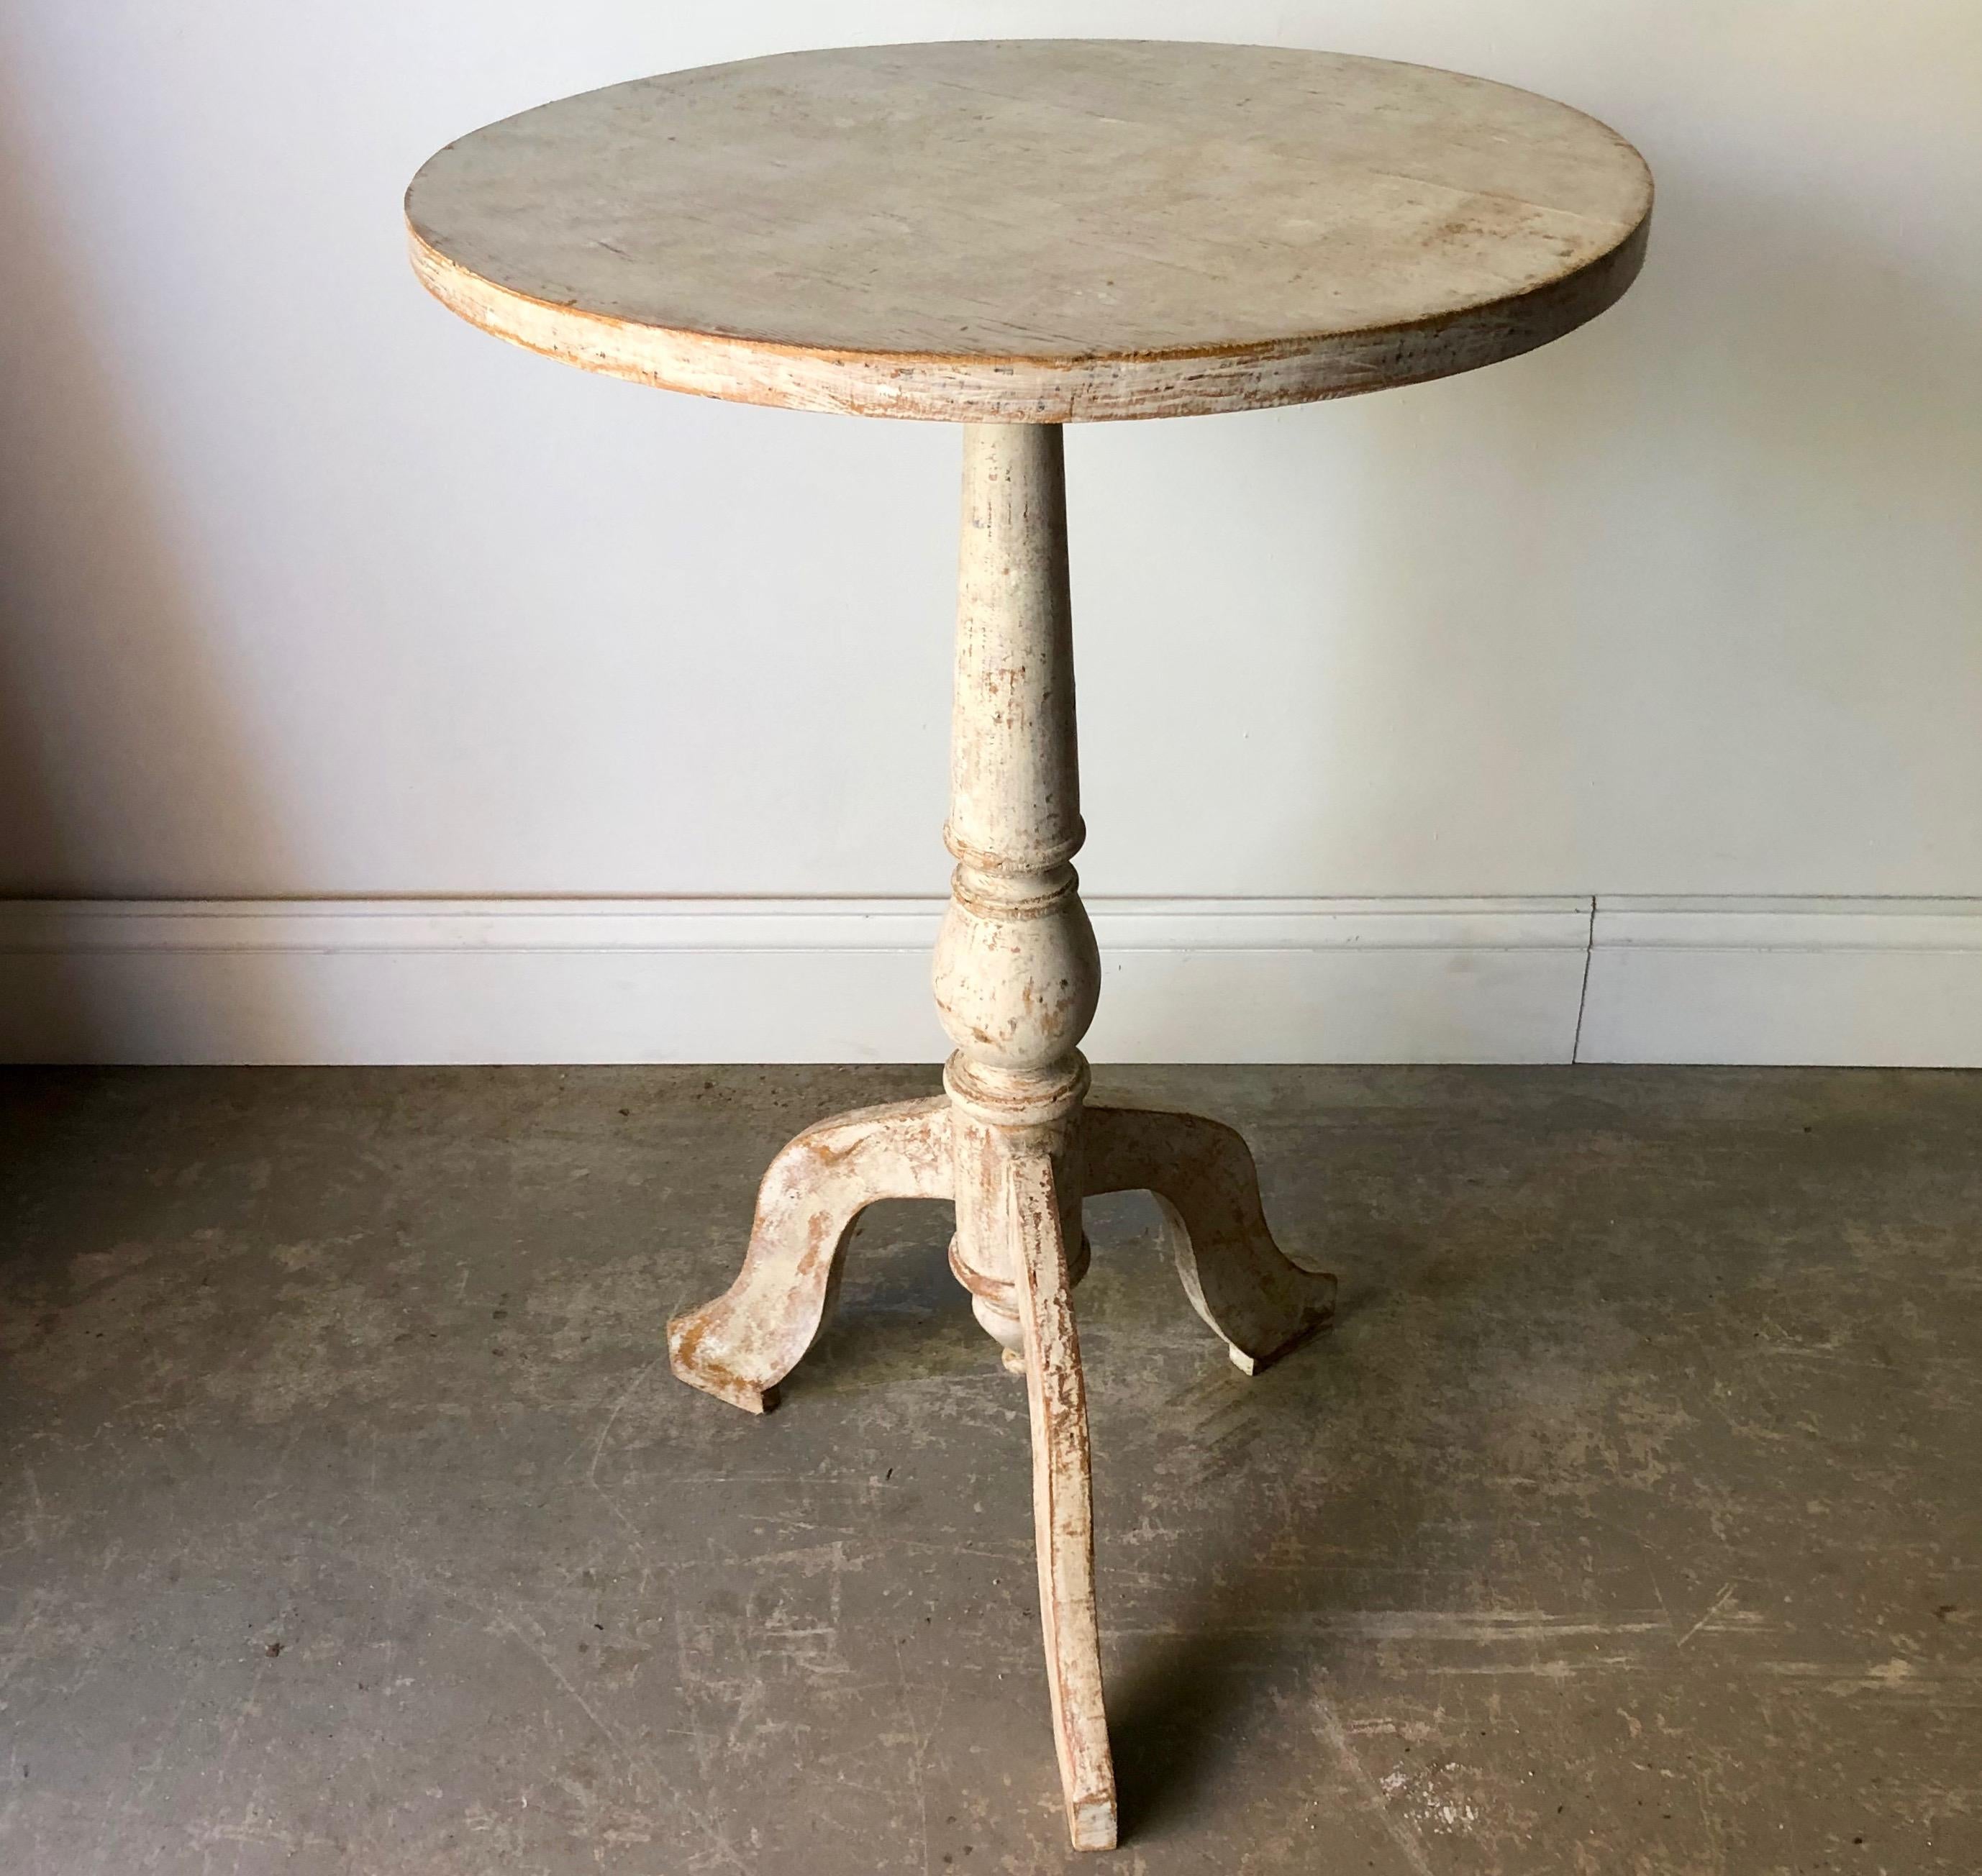 A charming small round pedestal table in Karl Johann period with turned base supported by beautifully carved legs. Scraped back to traces of its original color. Sweden, circa 1840-1850. 
More than ever, we selected the best, the rarest, the